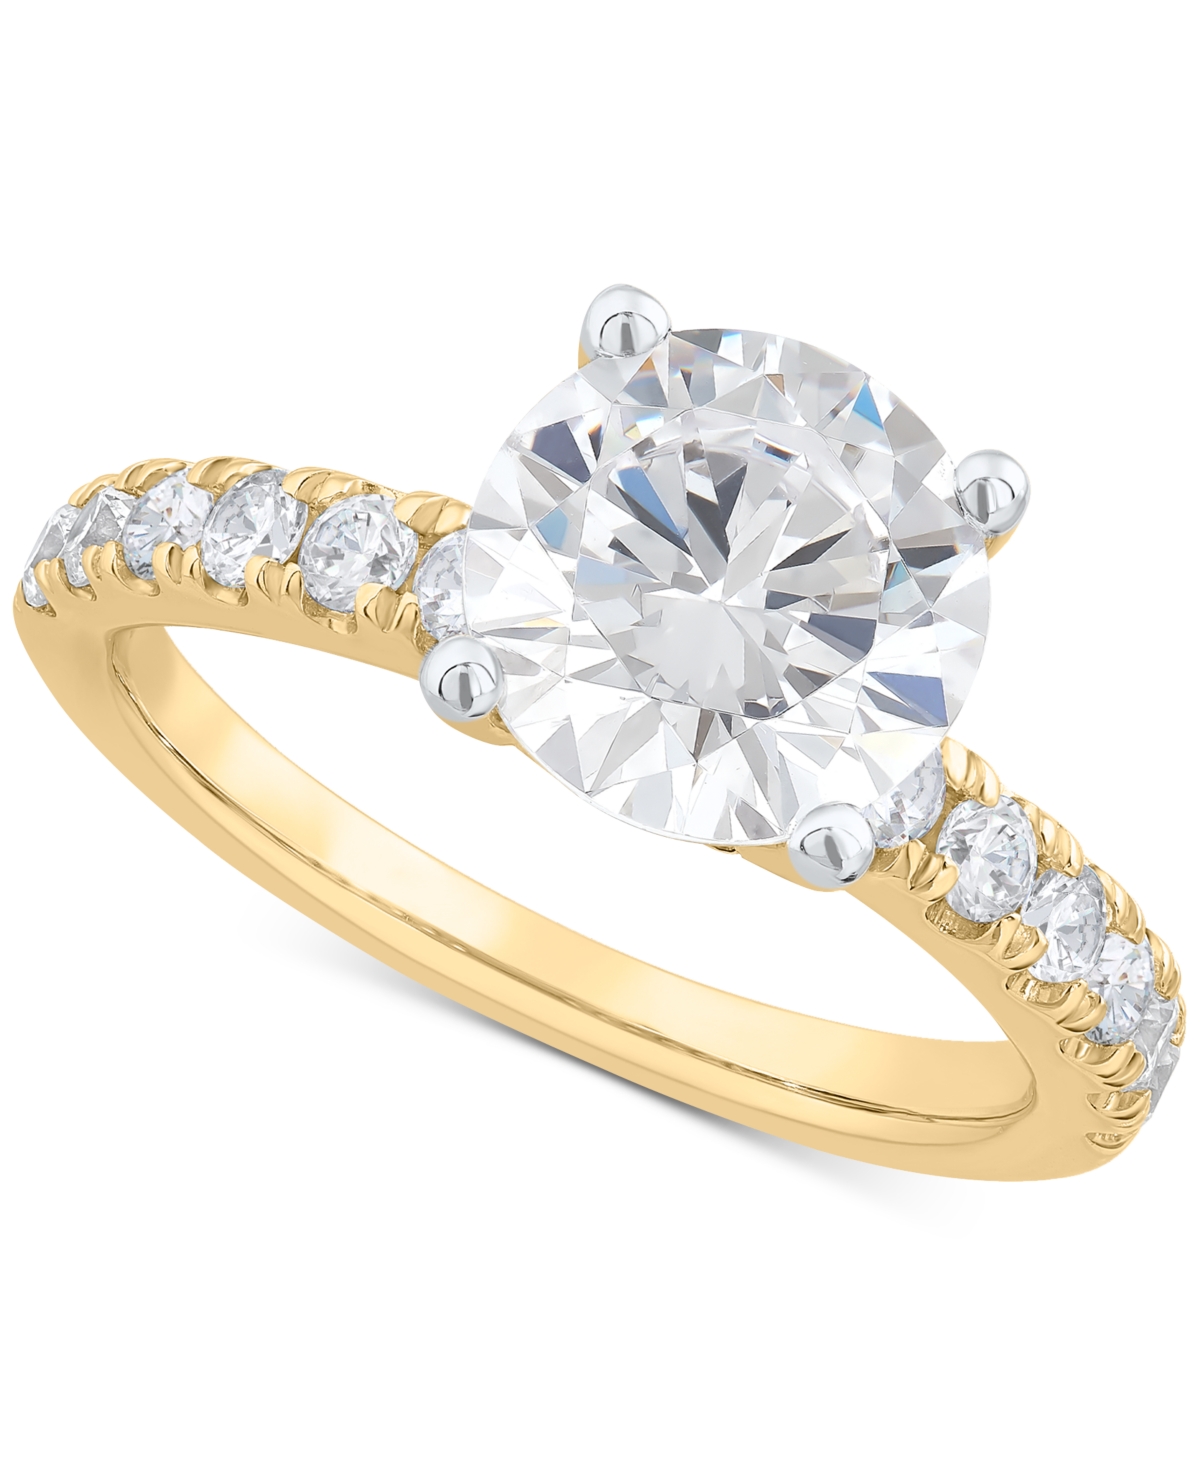 Igi Certified Lab Grown Diamond Engagement Ring (3 ct. t.w.) in 14k White Gold or 14k Gold & White Gold - Yellow  White Gold